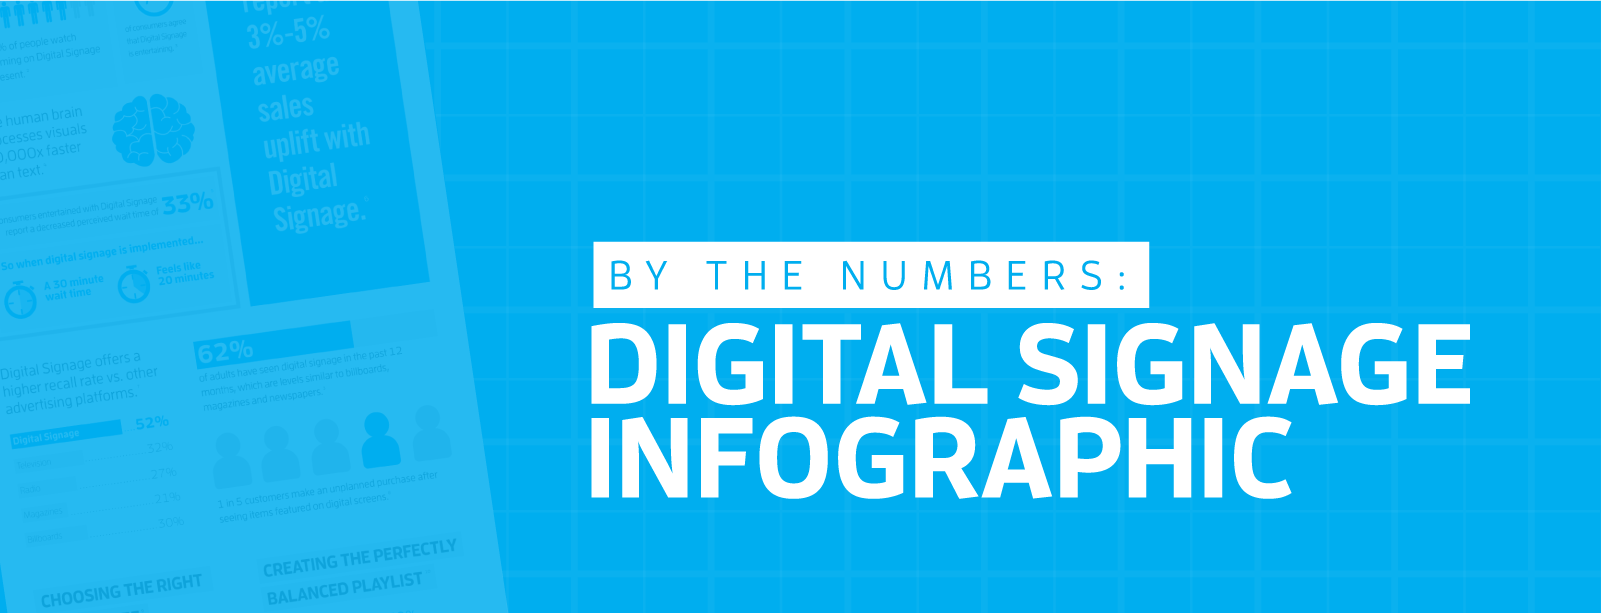 the ultimate digital signage infographic